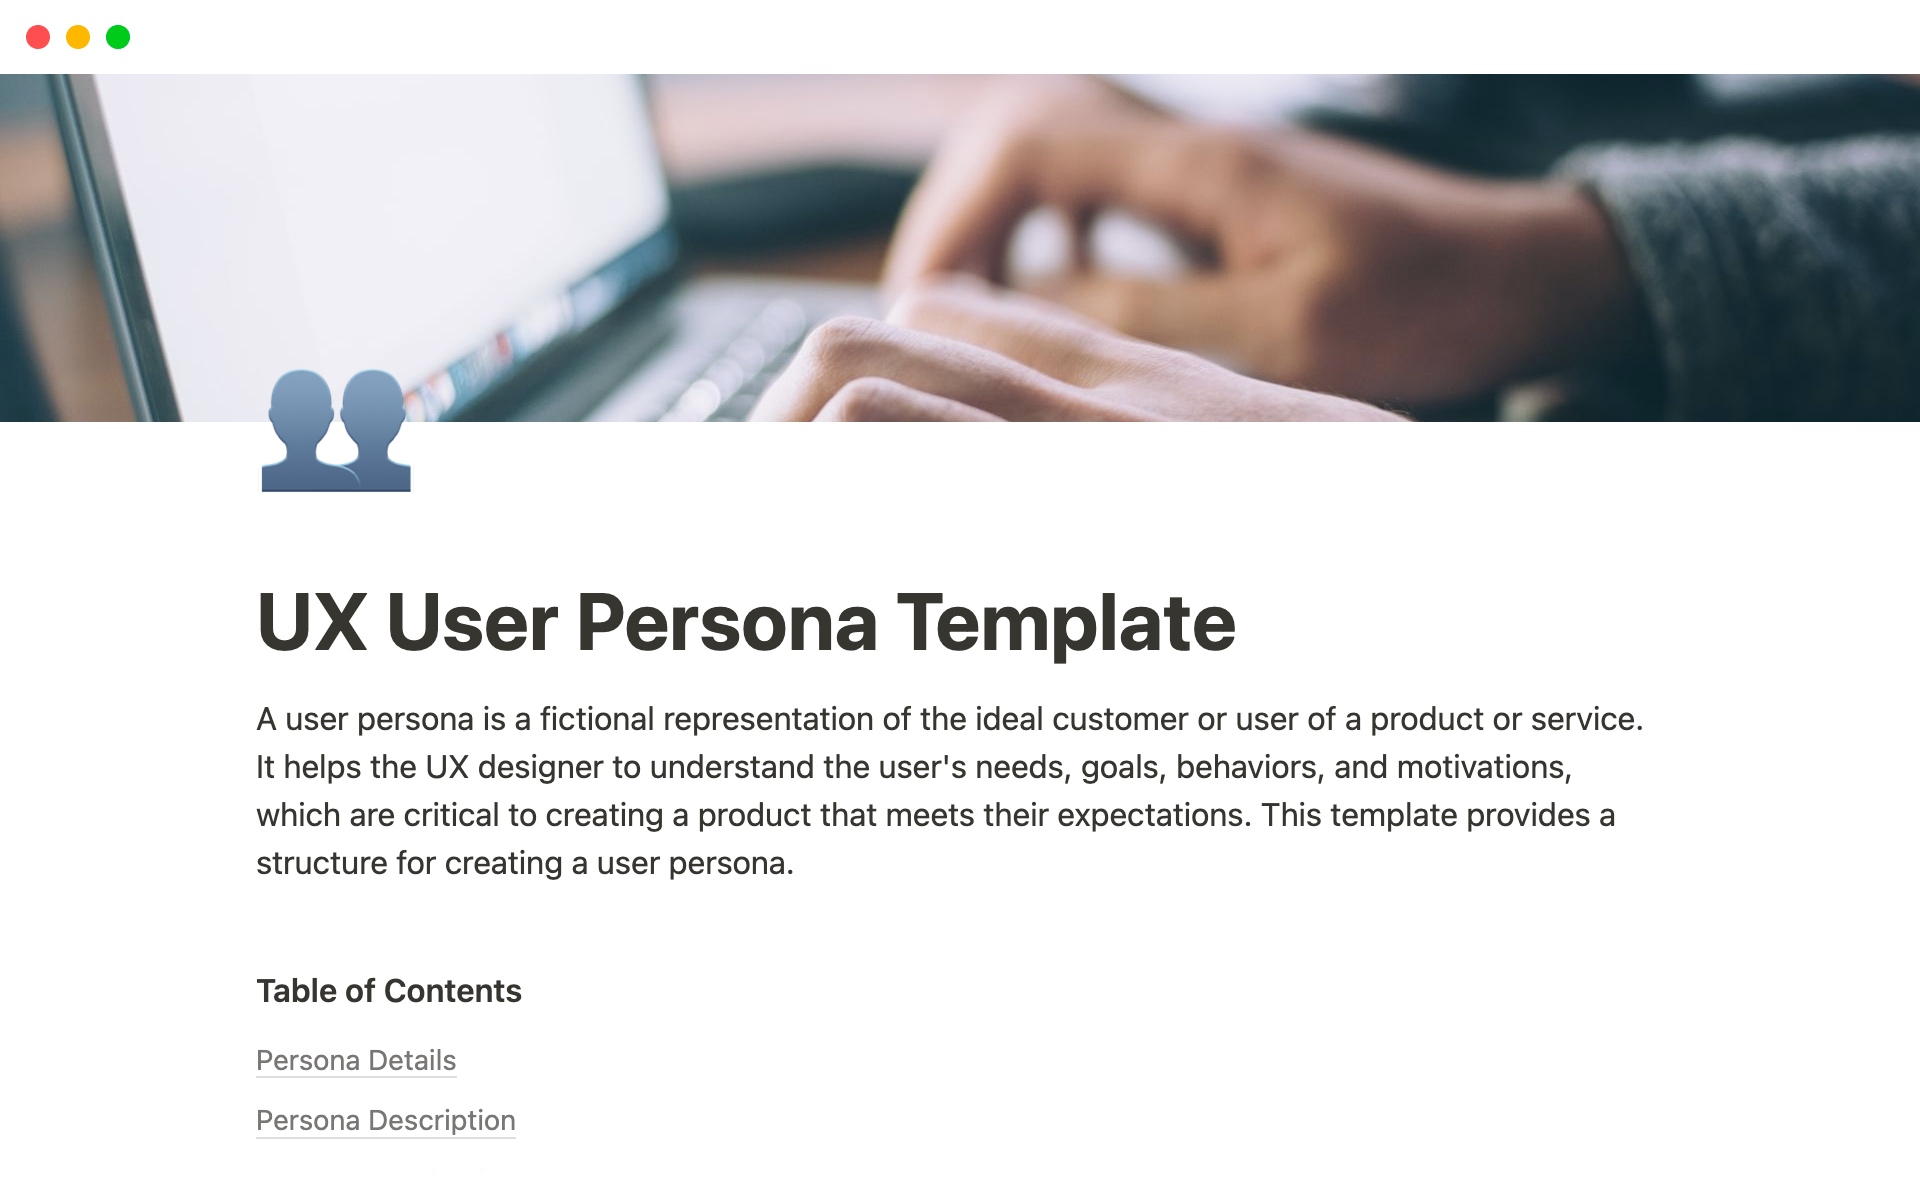 Structured, step by step guide on how to create a UX user persona with detailed explanations and examples of each section.